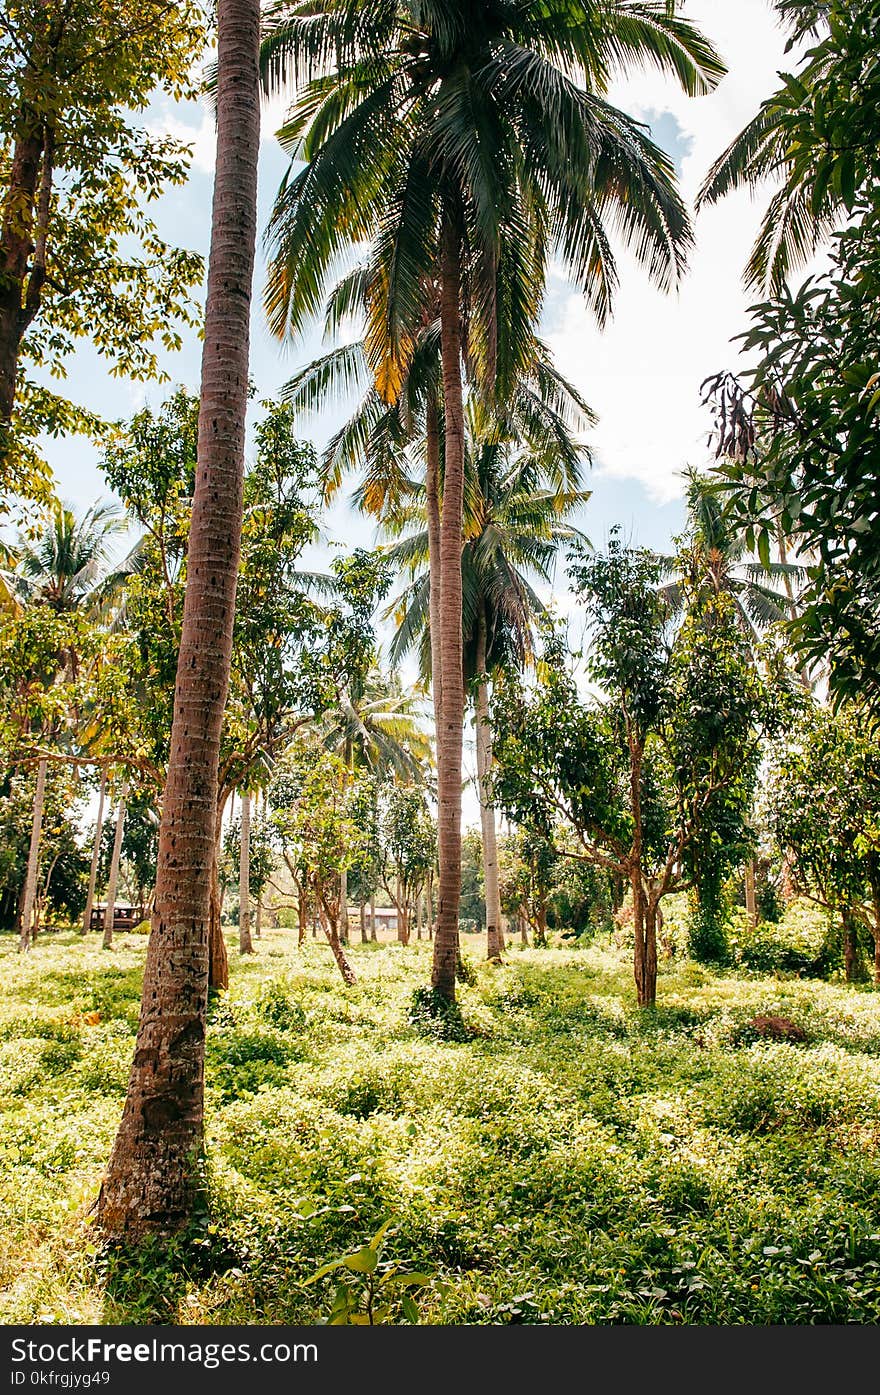 Tropical coconut garden in Southeast Asia country, Local coconut tree and farm Thailand, Cambodia, Phillippines